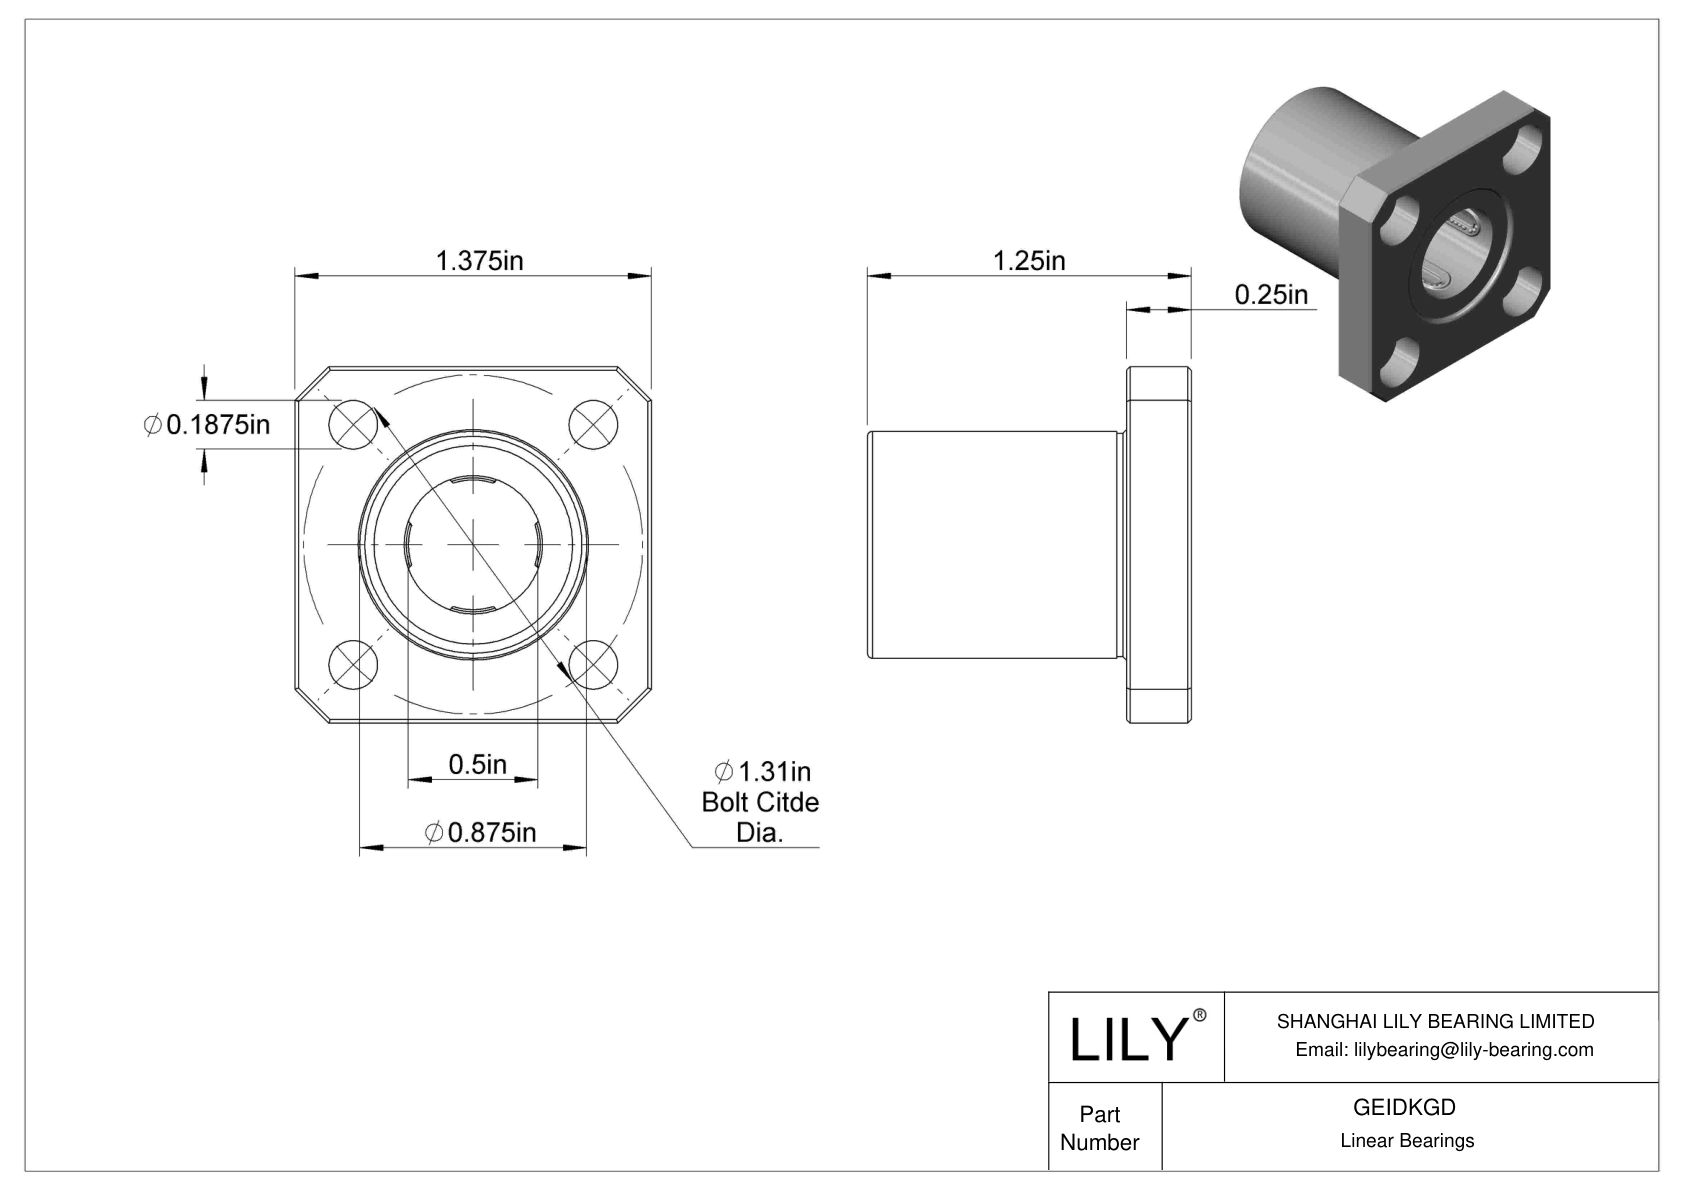 GEIDKGD Flange-Mounted Linear Ball Bearings cad drawing